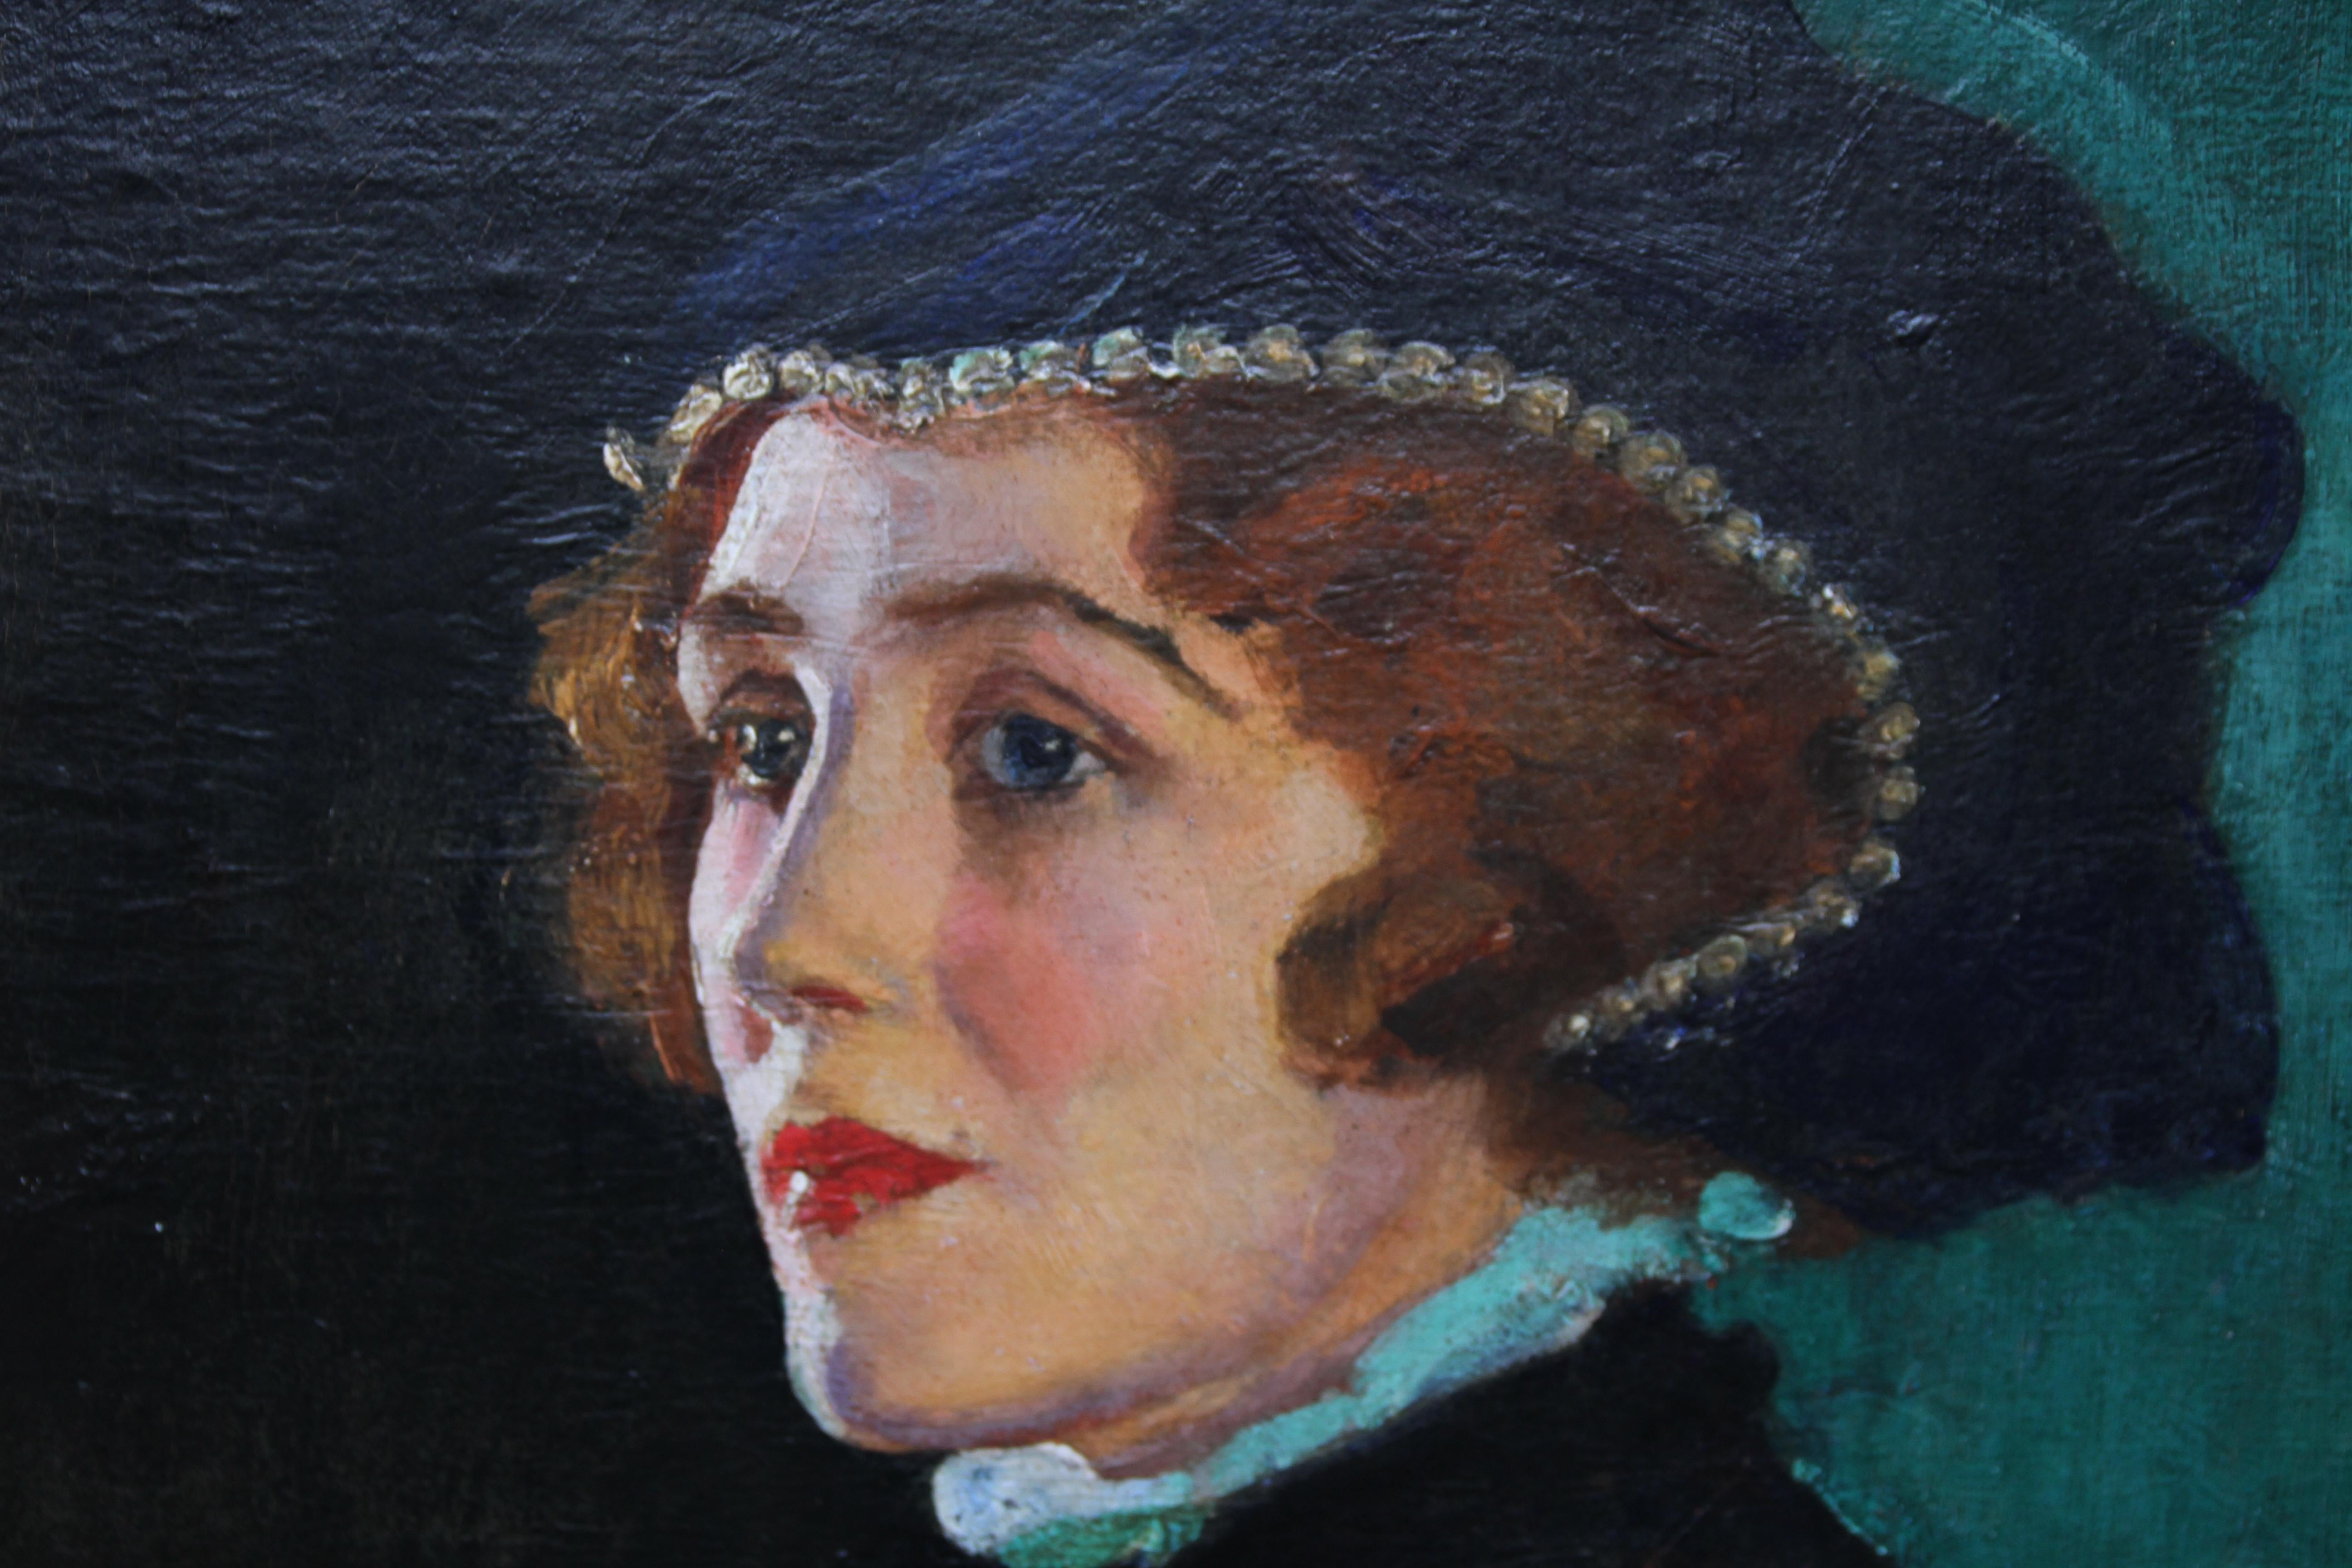 Cecily Byrne as Mary Stewart - British art 30's actress portrait oil painting - Realist Painting by George Carr Drinkwater